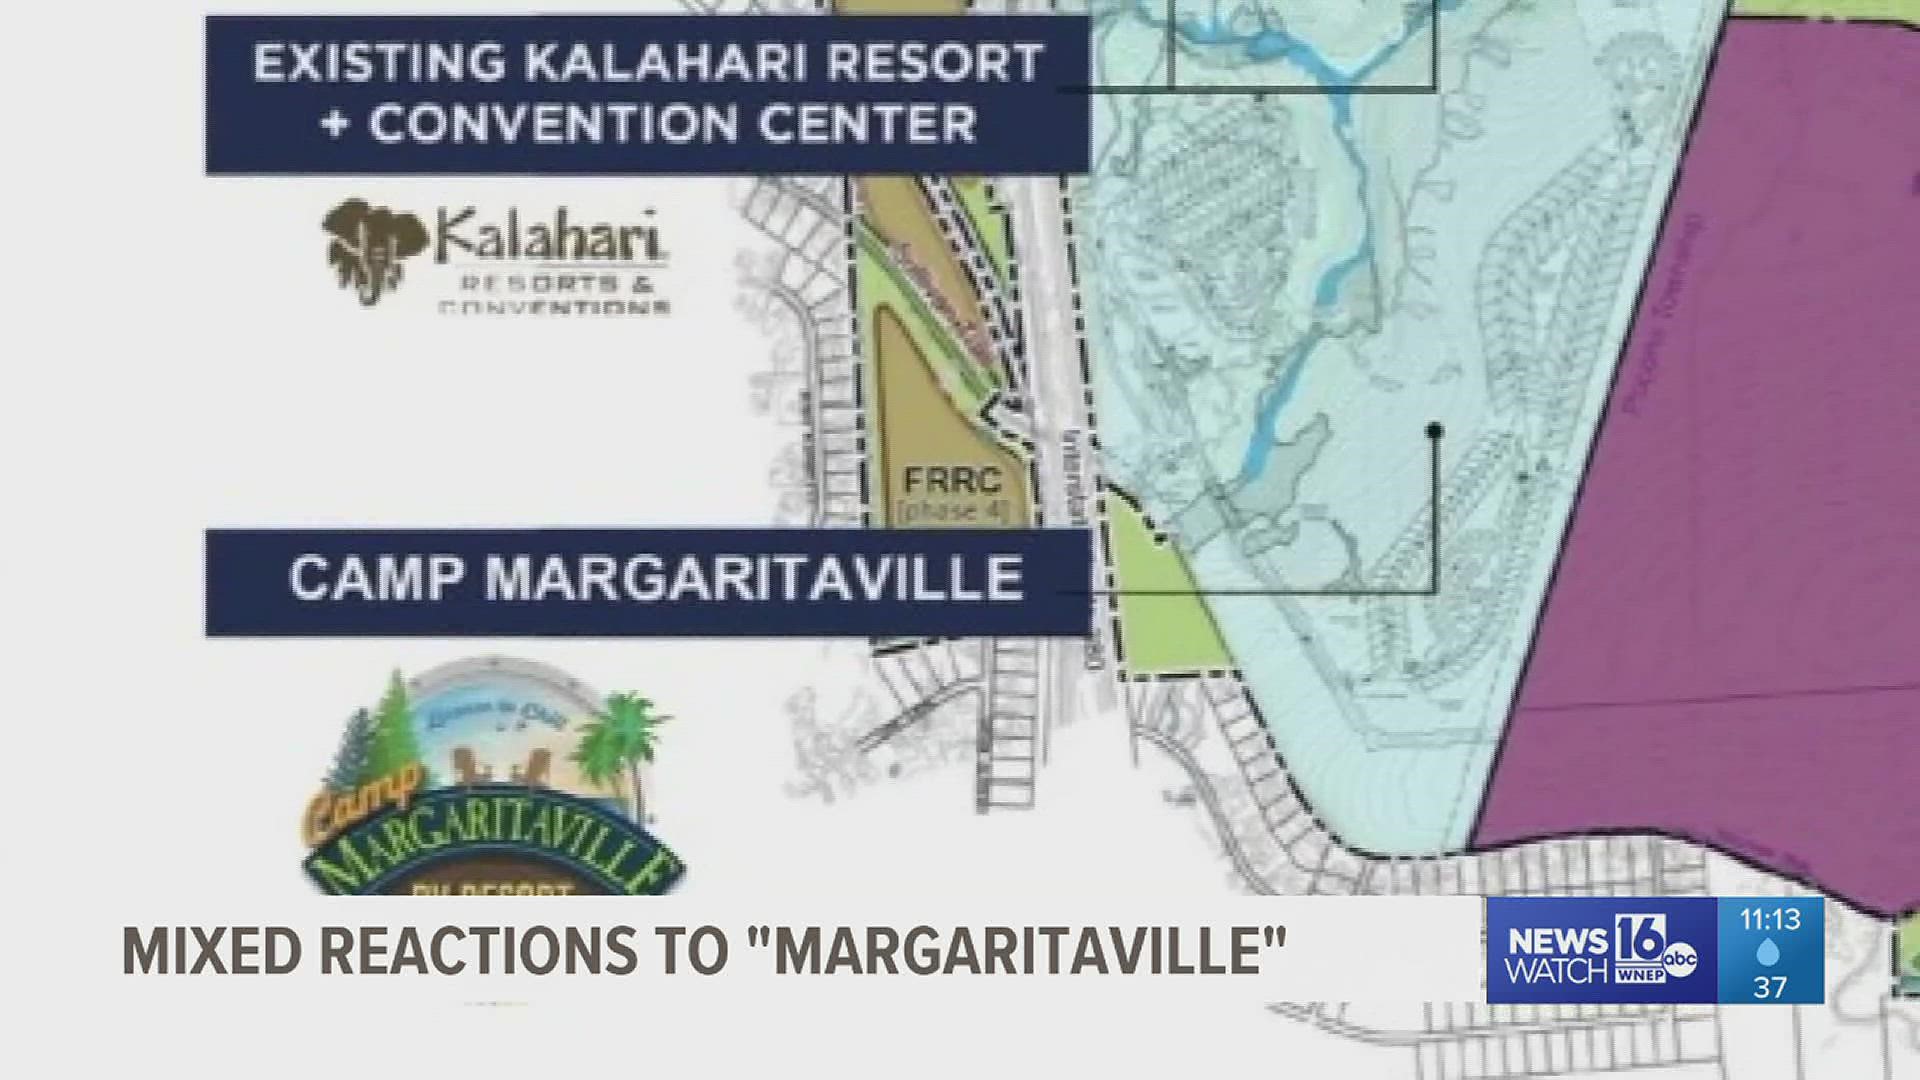 The new resort boasts a lot of attraction, but not everyone's spirits are high "Margaritaville" will happen.